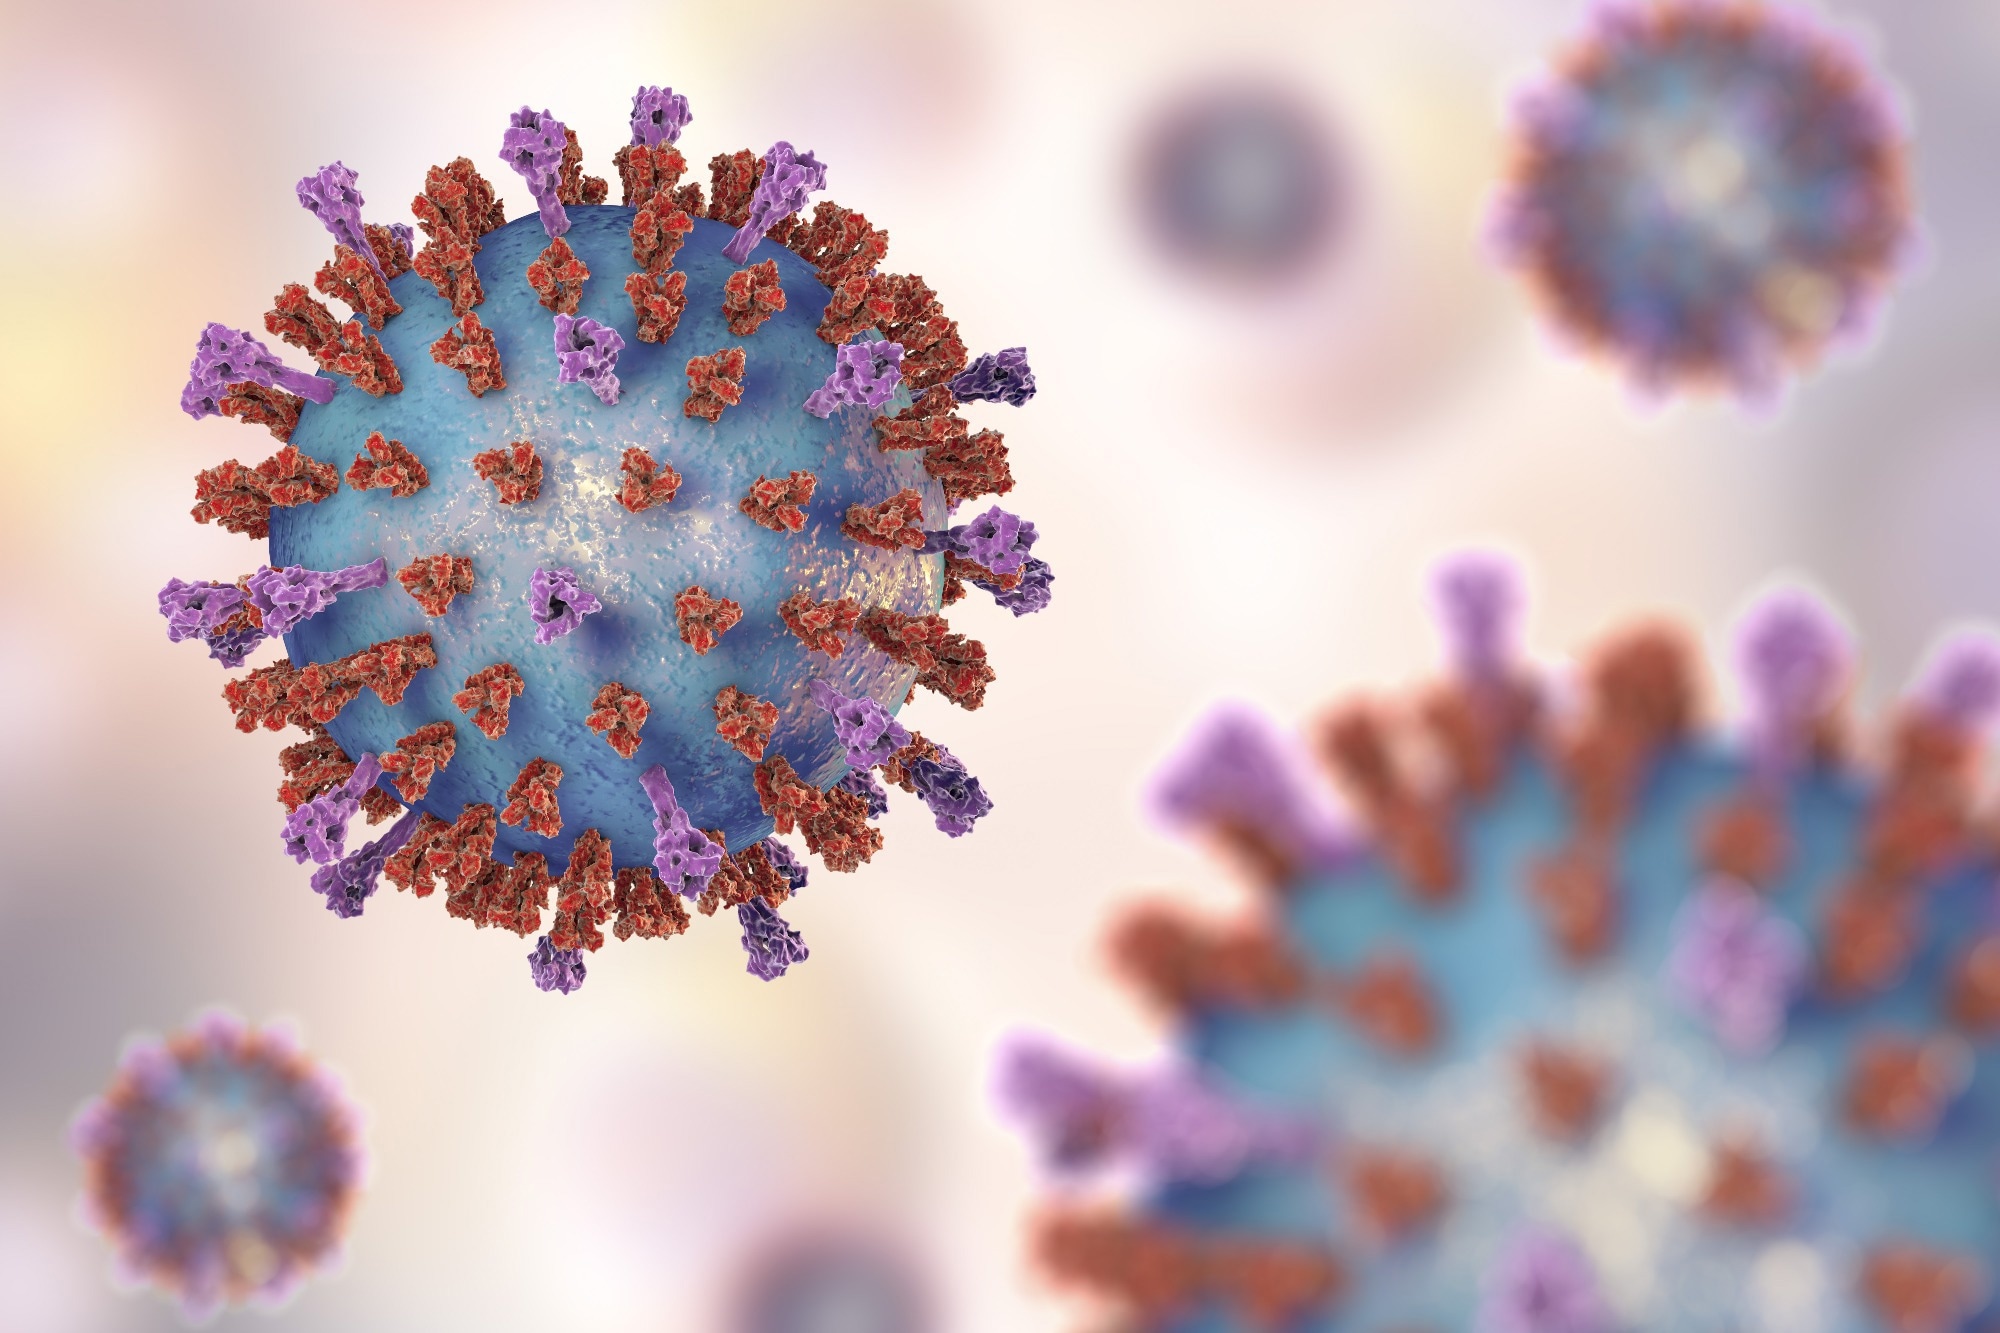 Study: Incidence of Respiratory Syncytial Virus Infection in Older Adults Before and During the COVID-19 Pandemic. Image Credit: Kateryna Kon/Shutterstock